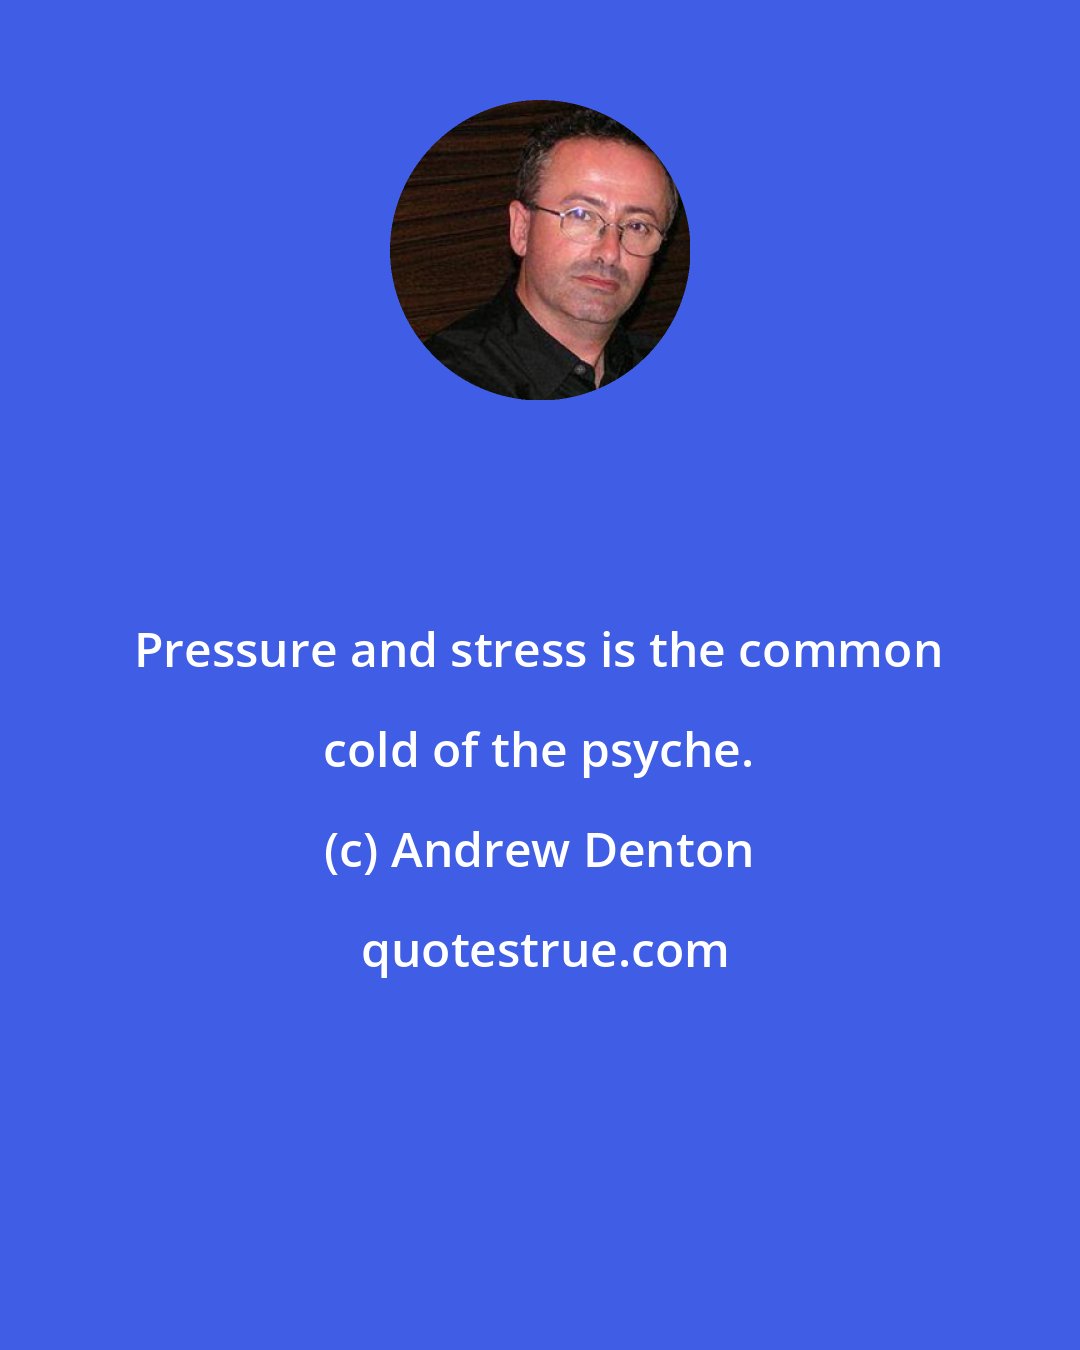 Andrew Denton: Pressure and stress is the common cold of the psyche.